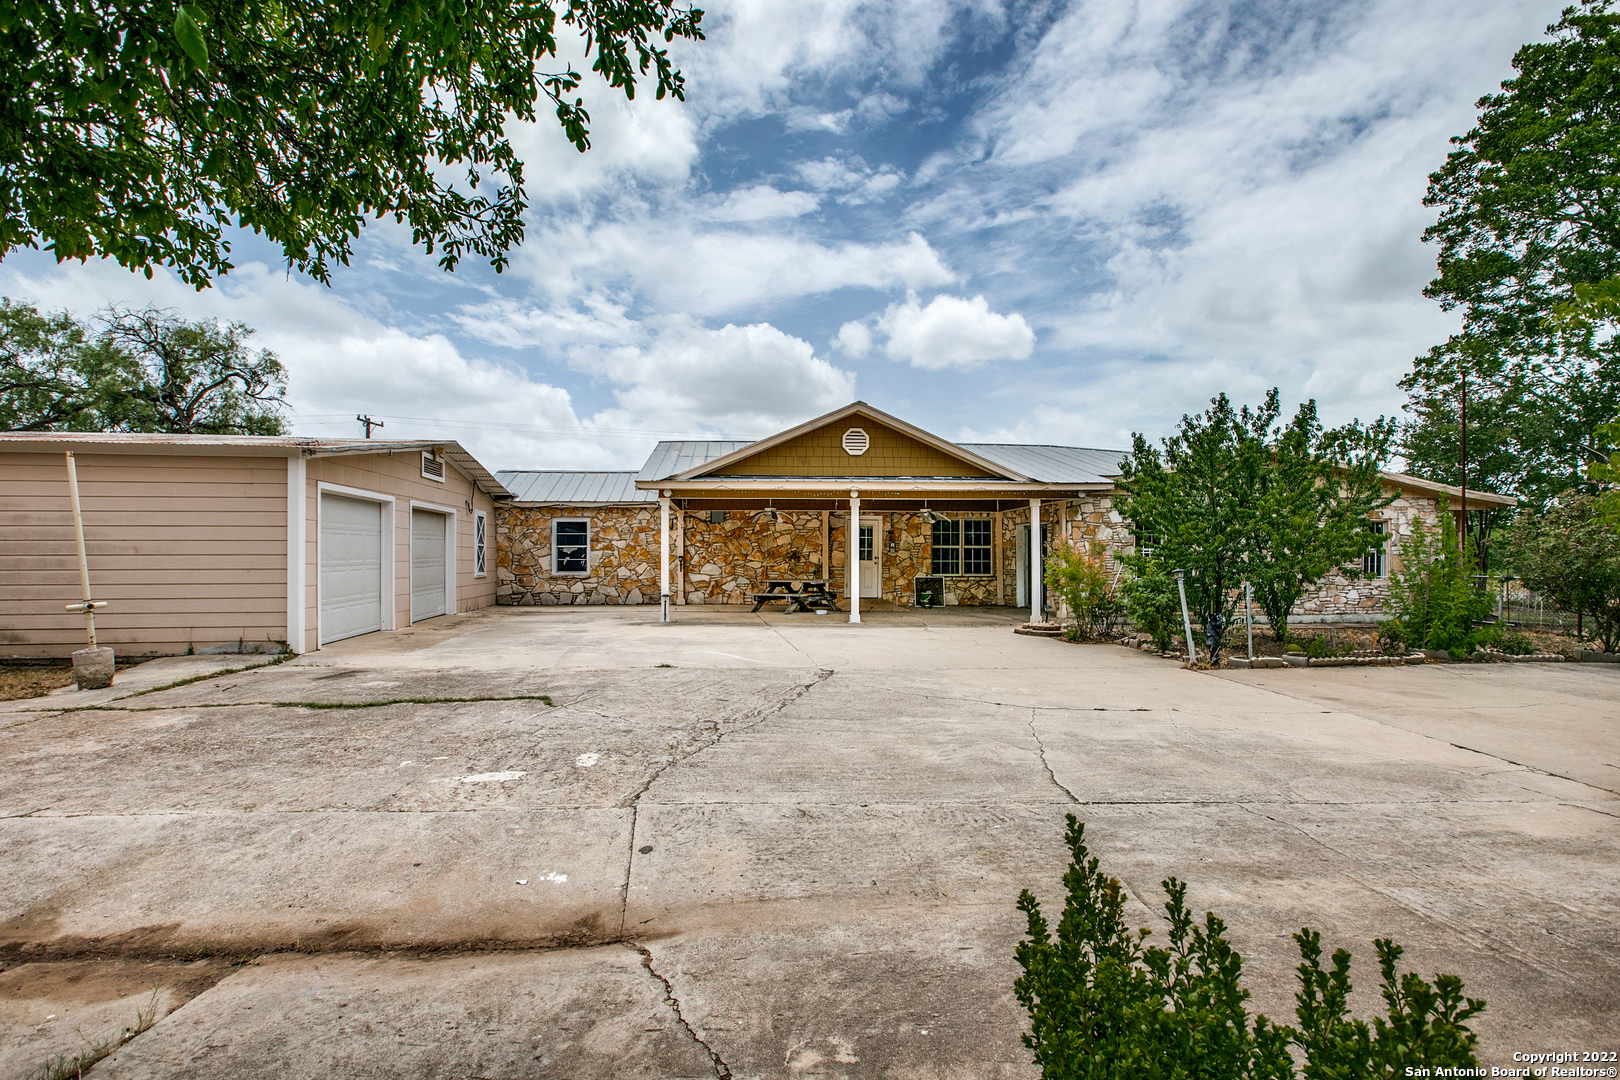 PRIME corner residential home on .71 acres, in a very desirable location in the Southside of San Antonio. This home needs some lots of updates, but plenty of room to make as home/office and plenty of parking! Currently zoned residential, but can be zoned commercial.  Recommend contacting Bexar County zoning division to see if it can be zoned for your business.  Fence was removed dividing 9756 & 9758 Southton allowing owners to walk to work and save money on gas (restaurant building for sale as well).  Not many corner lots become available with this type of potential for home owners or business owners.  Just minutes away from HWY 410, with easy access to Brooks City Base, 281 N, 37 South, Texas A&M San Antonio, restaurants, retail and much more.